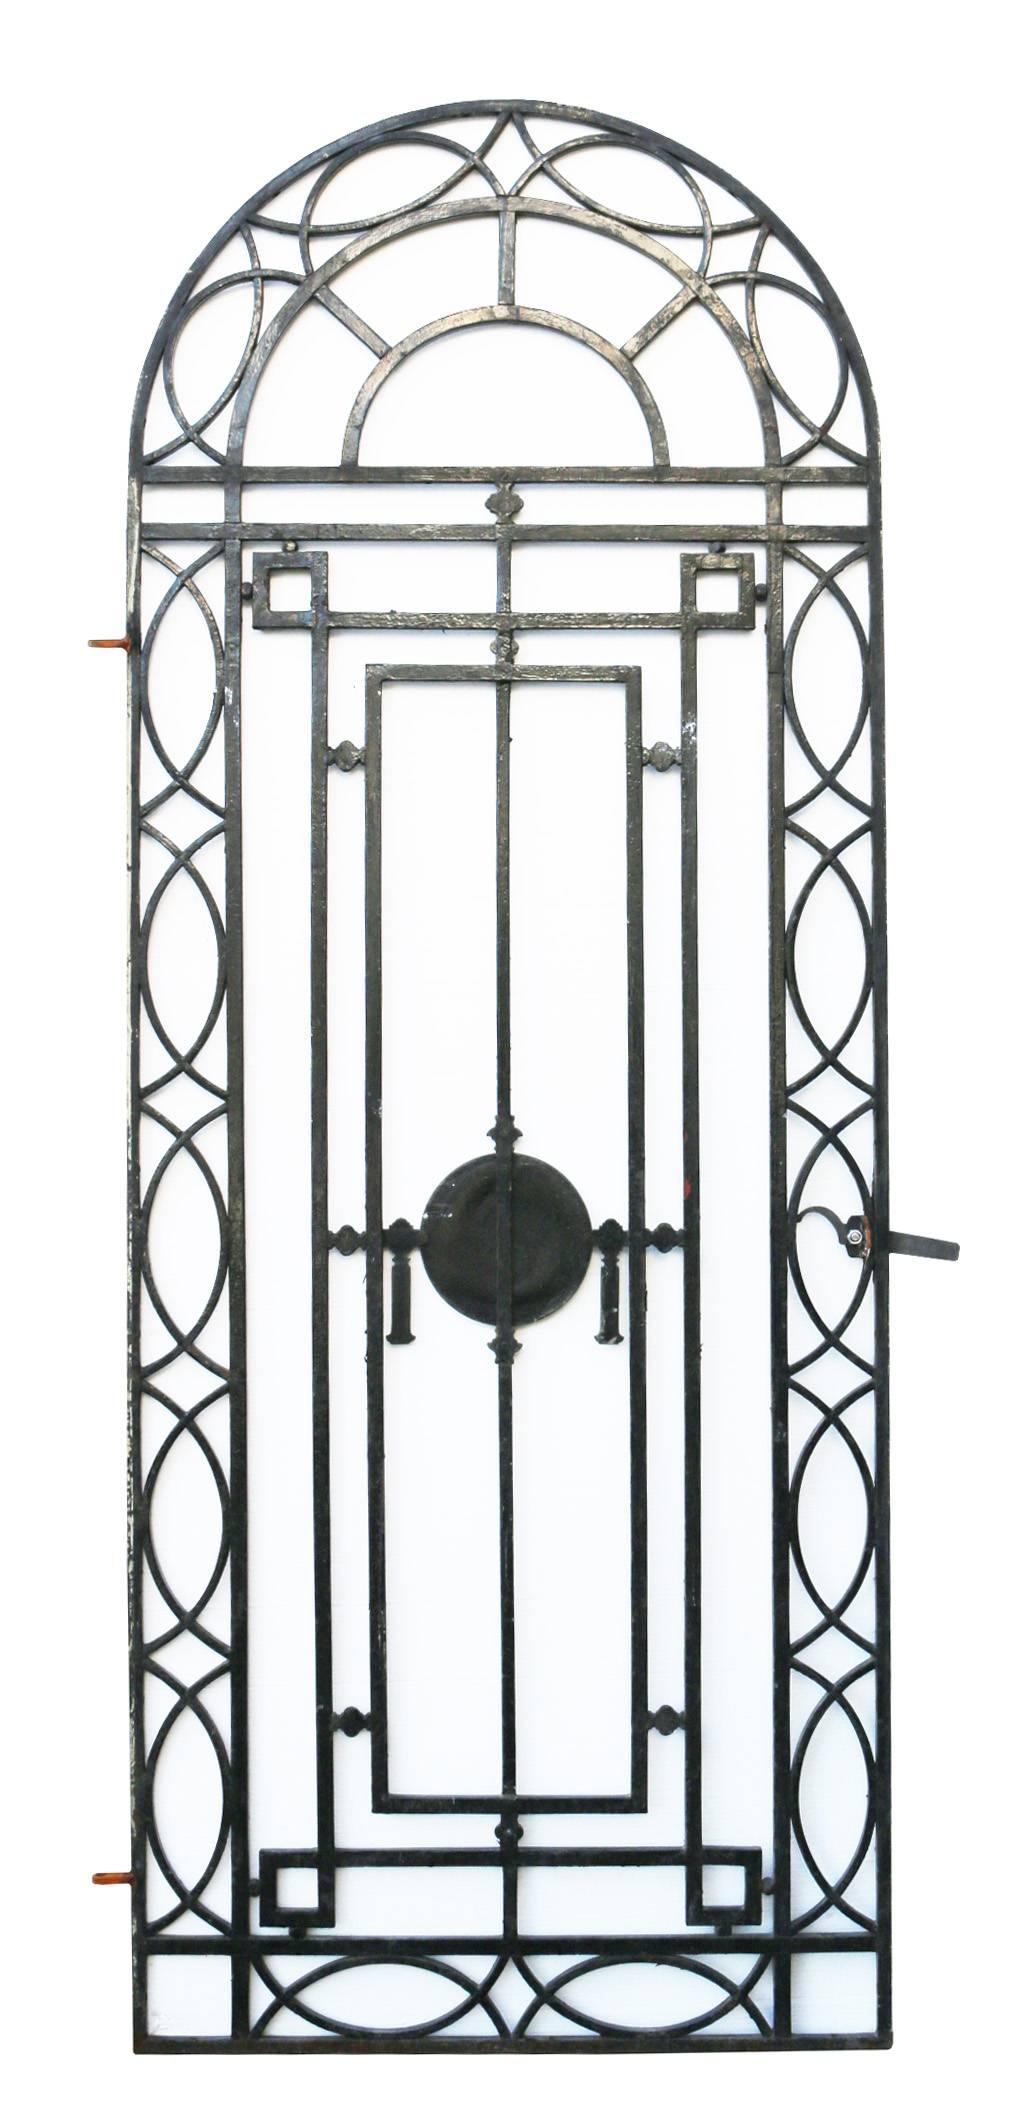 This gate has a latch and hinges fitted. It is in excellent, original condition and would fit an opening of 98-100 cm.
Weight 70 kg.